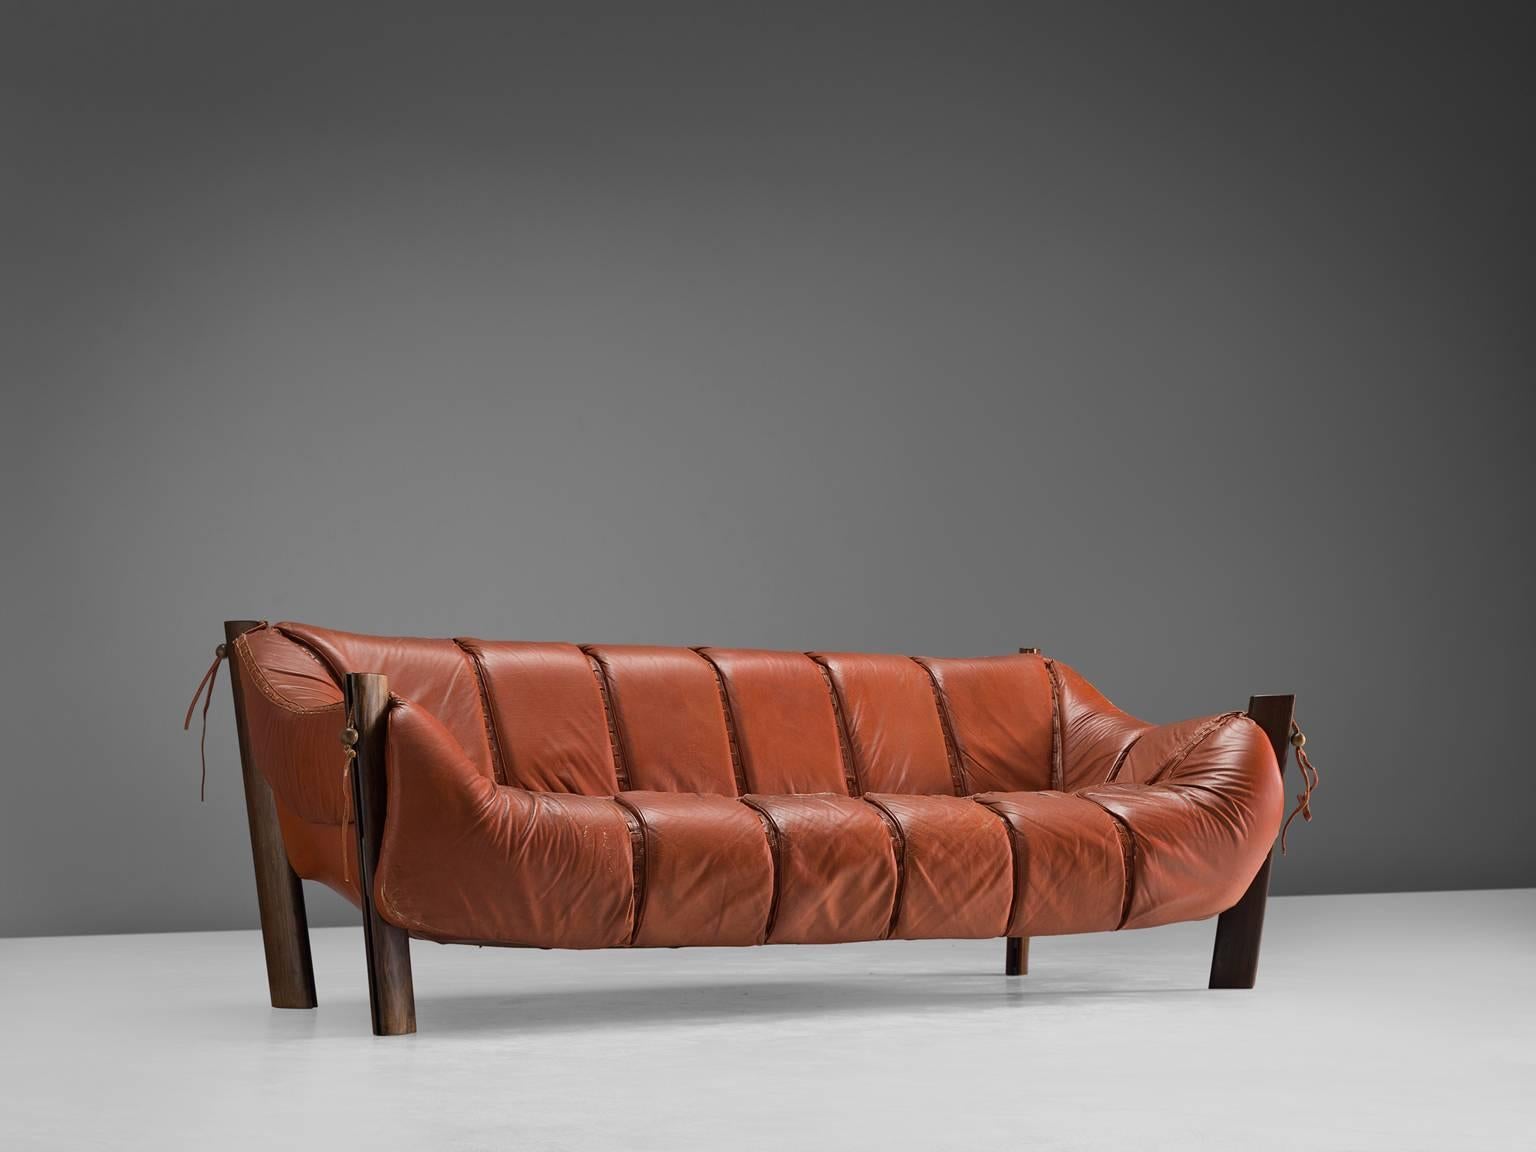 Percival Lafer, sofa model MP-211, in wood and leather, Brazil, 1974.

Three-seat sofa by Brazilian designer Percival Lafer. This sofa consist of a solid dark wooden base in which the leather seating 'hangs'. Soft cushions are folded over the wooden